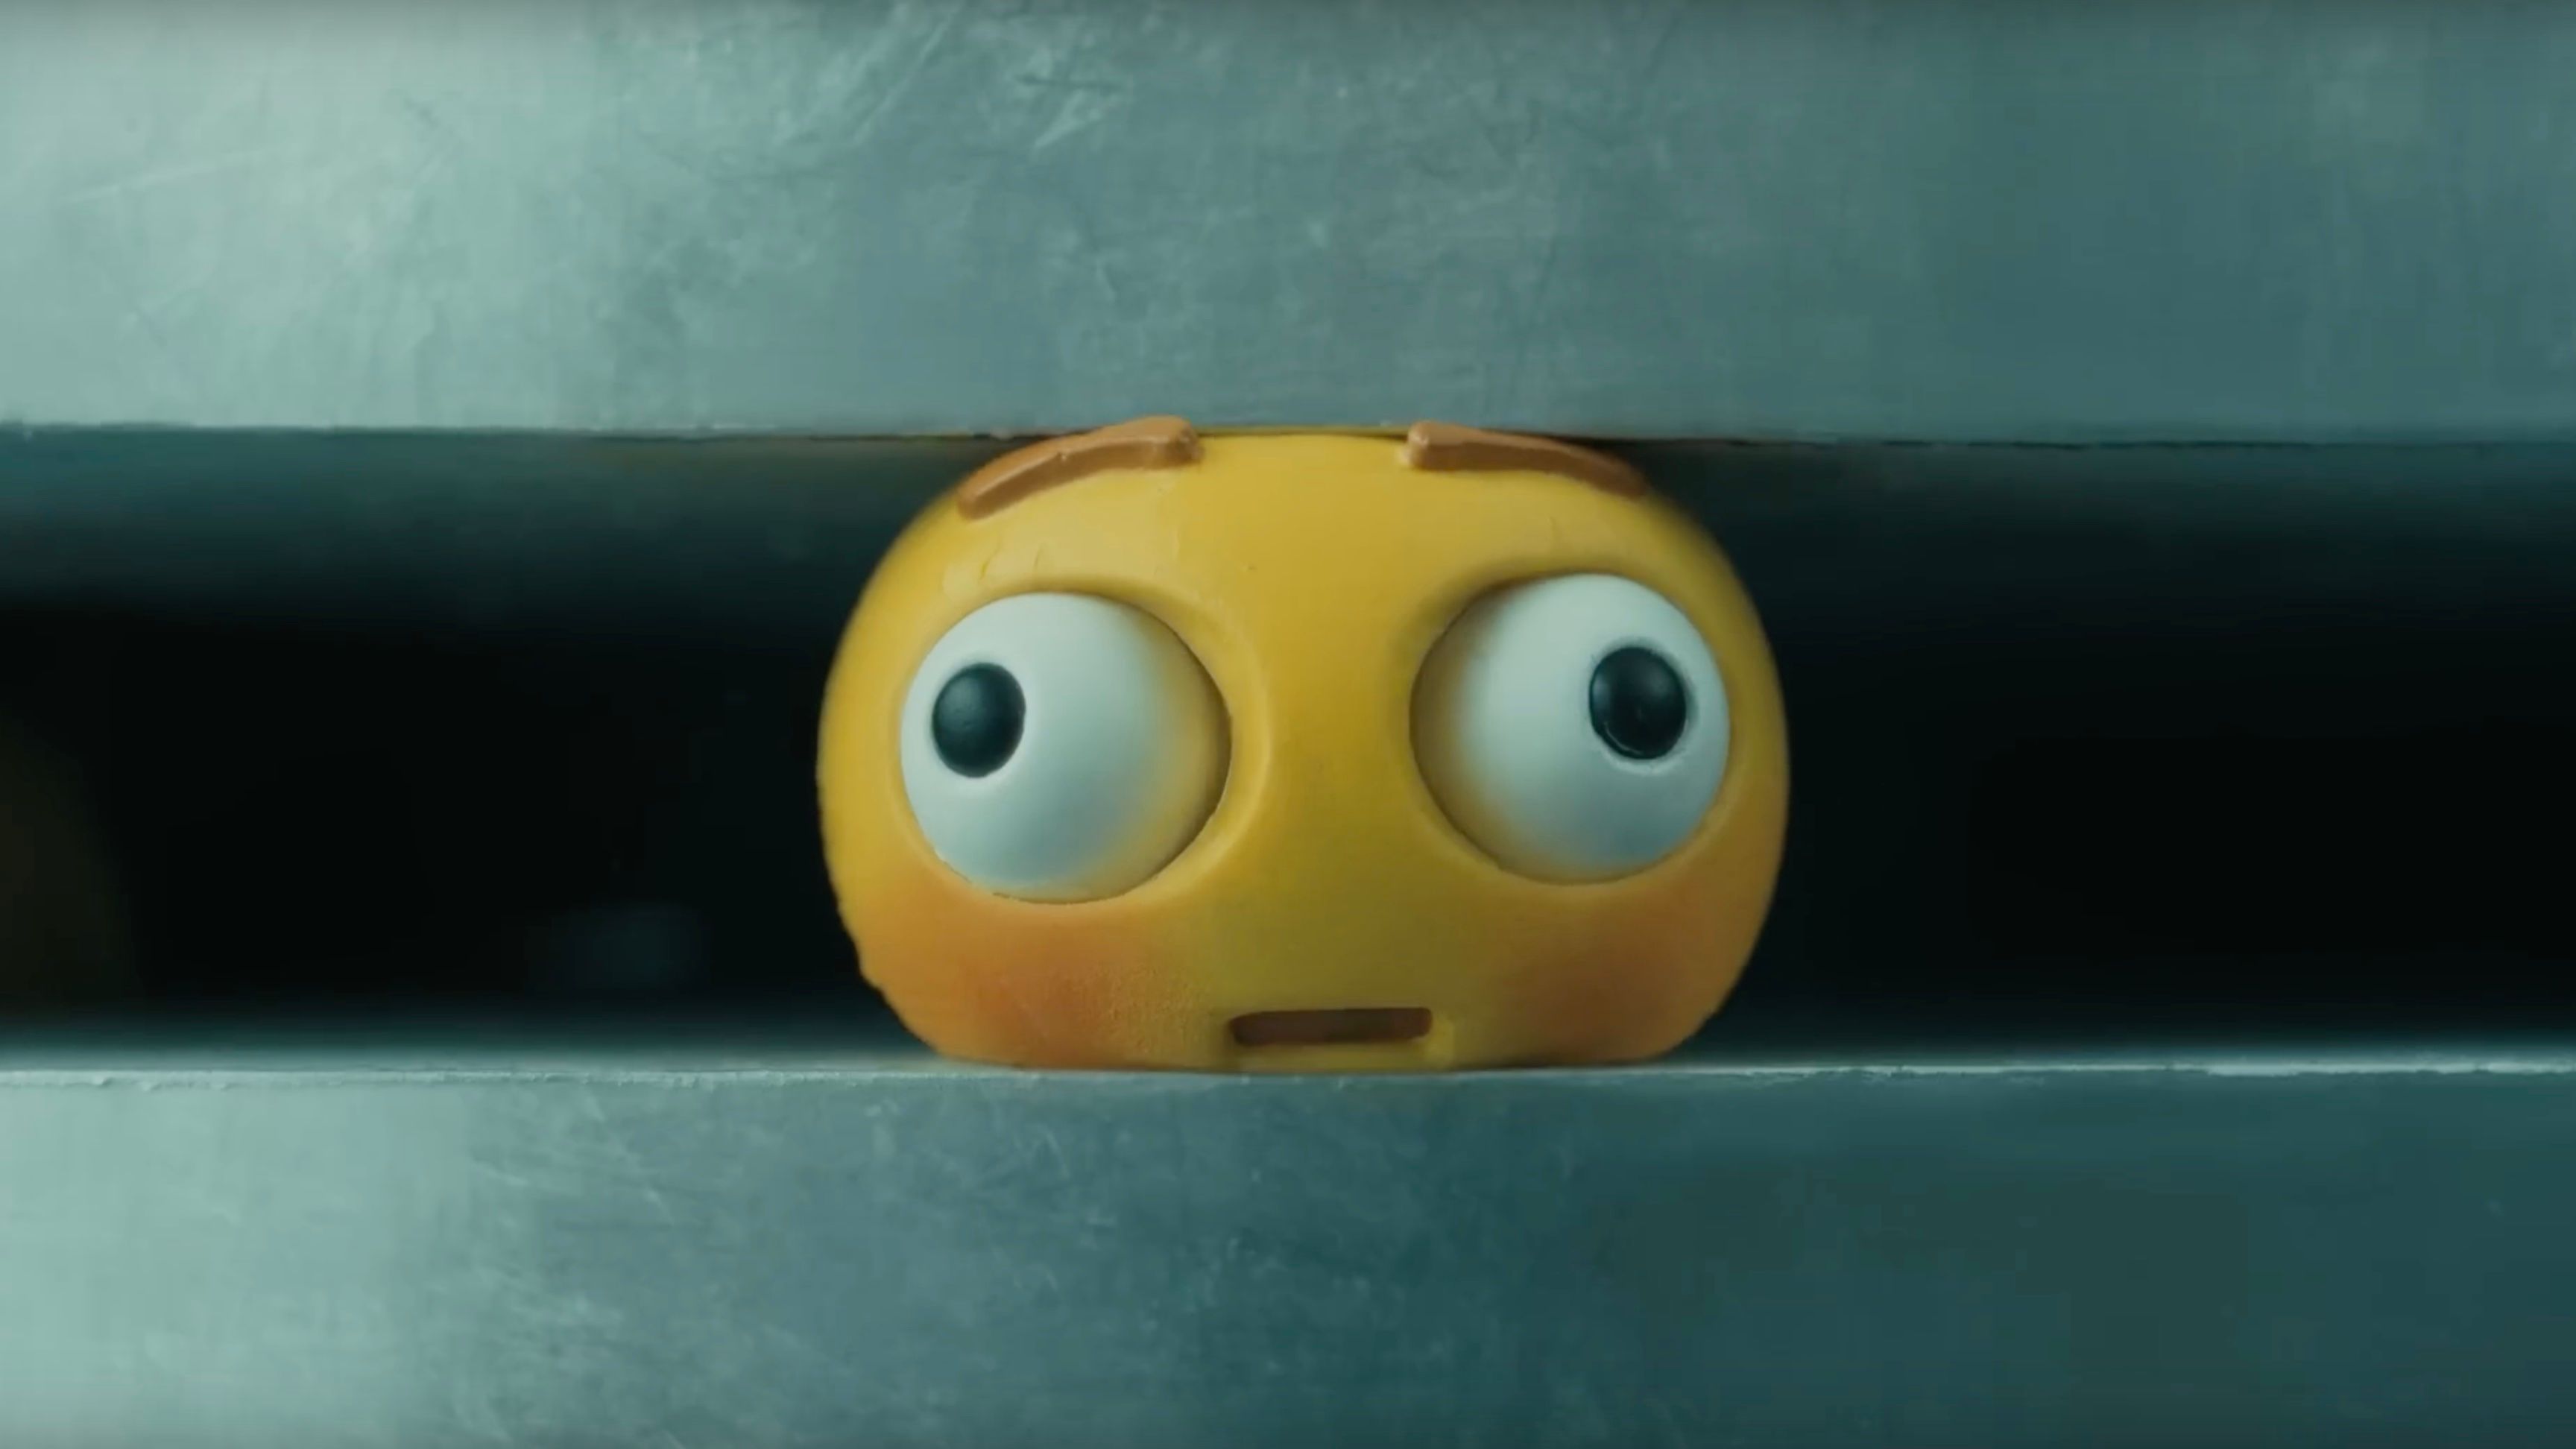 A screenshot from Apple's Crush ad for iPad Pro, showing an emoji being crushed by a hydraulic press